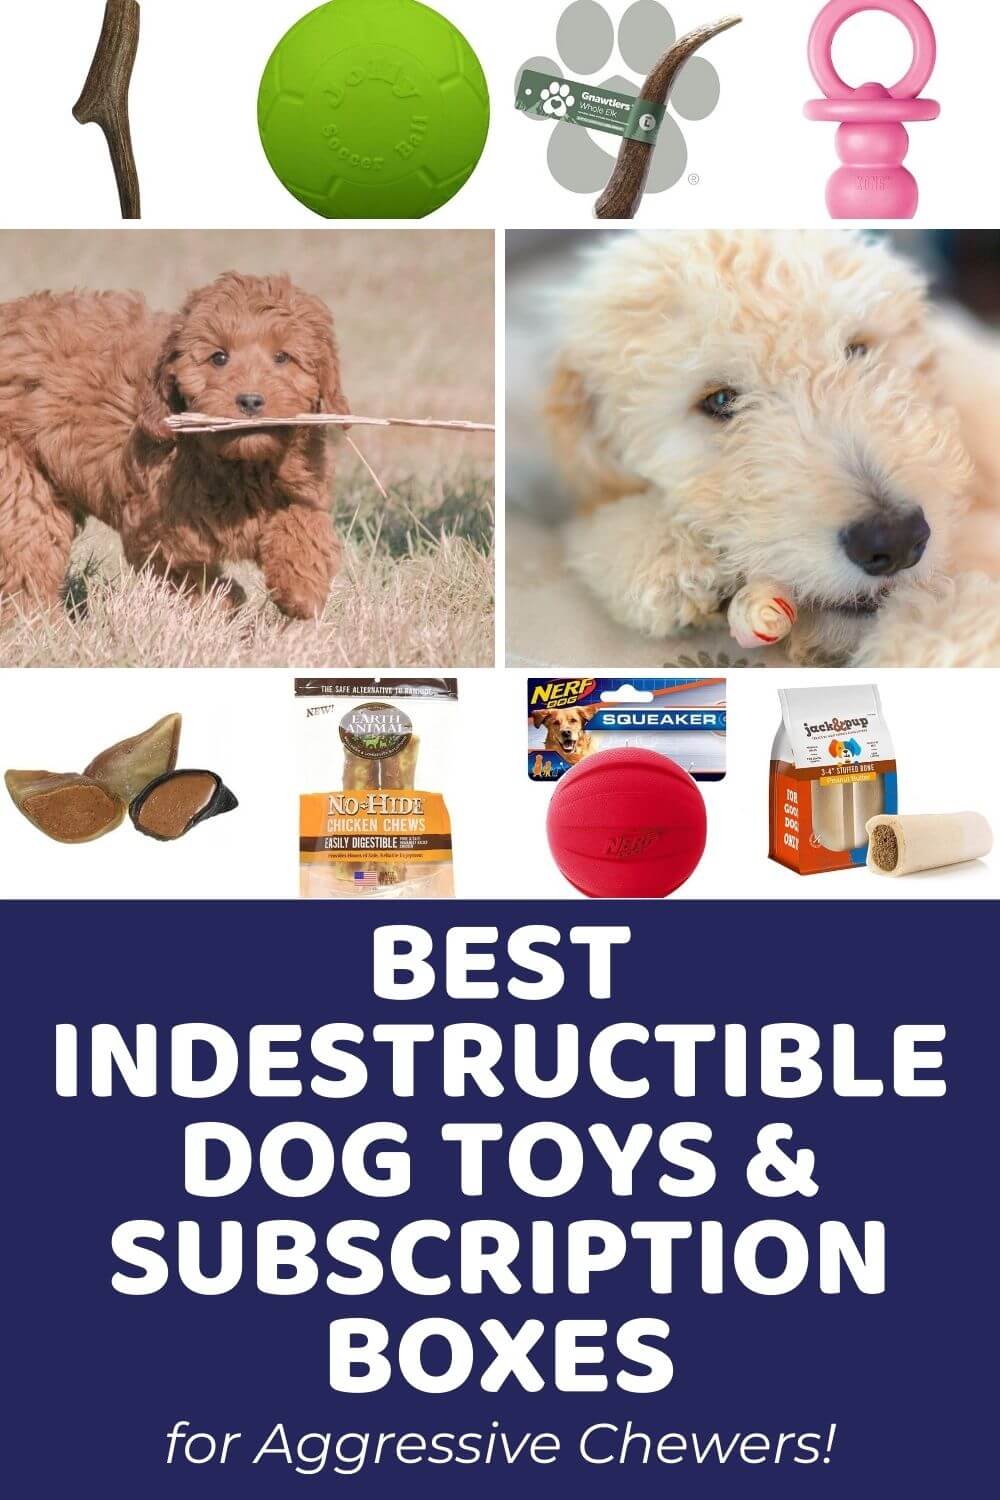 Best Indestructible Dog Toys and Subscription Boxes for Aggressive Chewers